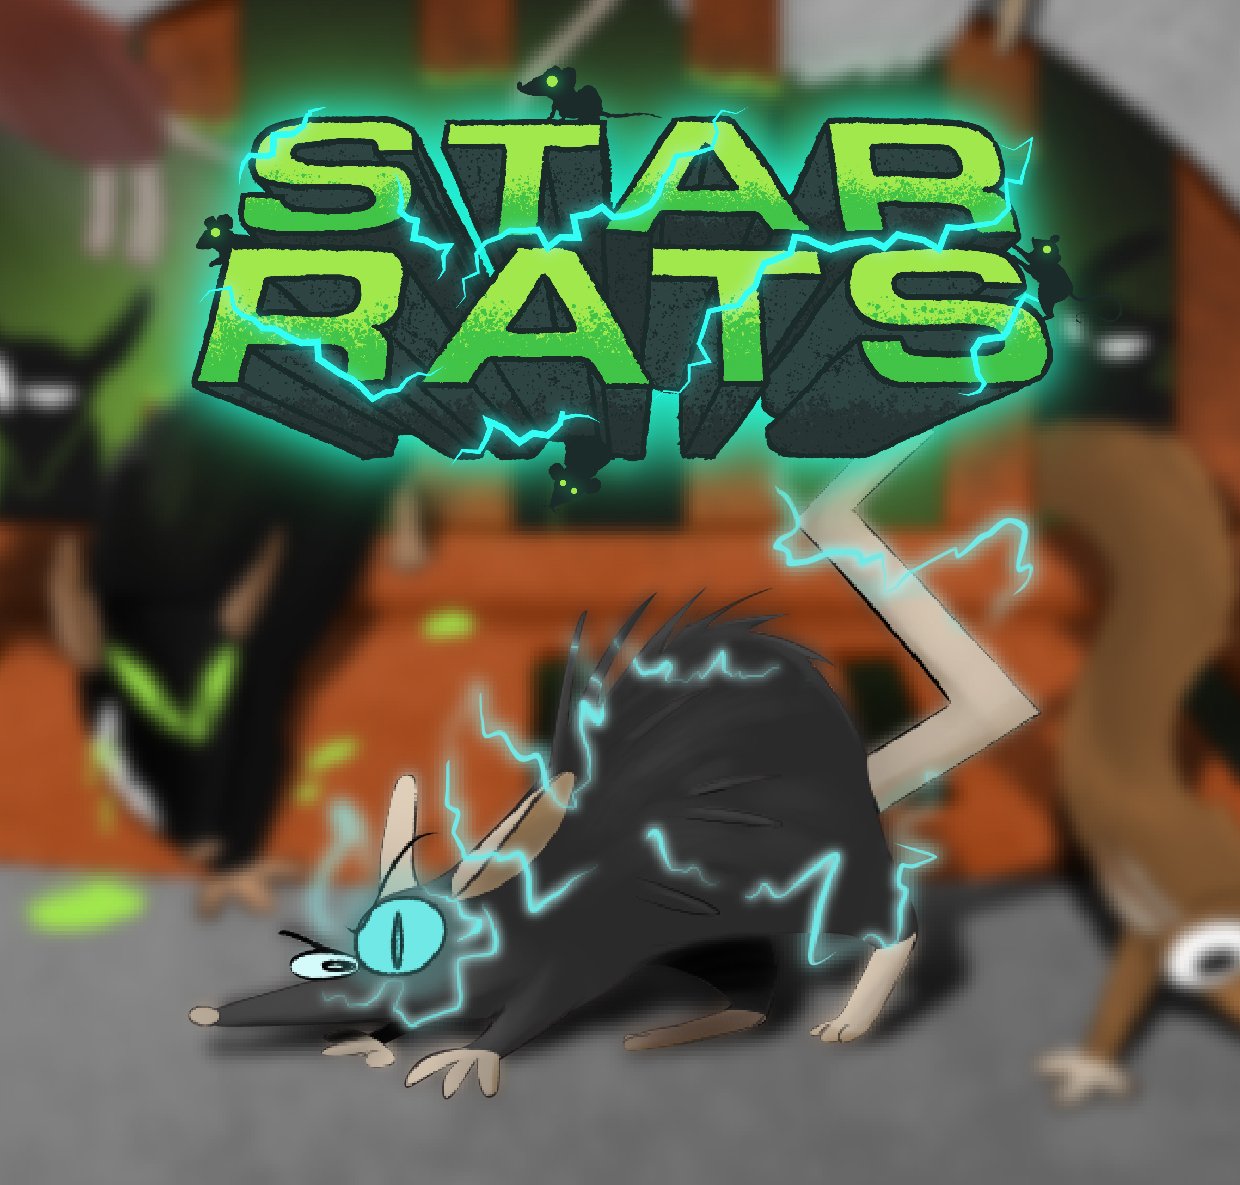 image of cartoon rat with electricity under title "STAR RATS"